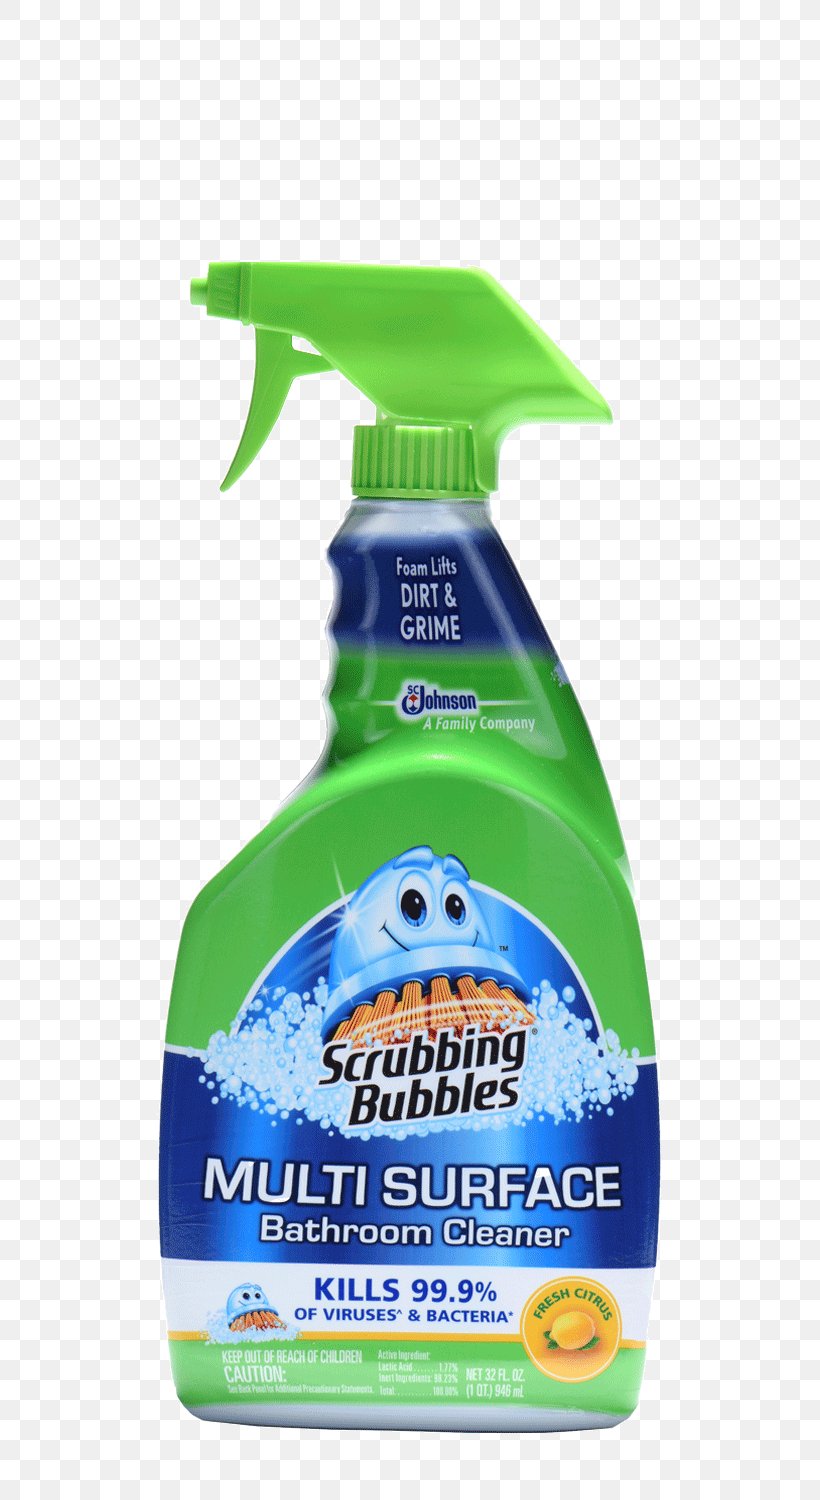 Scrubbing Bubbles Toilet Cleaner Bathroom Cleaning, PNG, 540x1500px, Scrubbing Bubbles, Bathroom, Bathtub, Cleaner, Cleaning Download Free